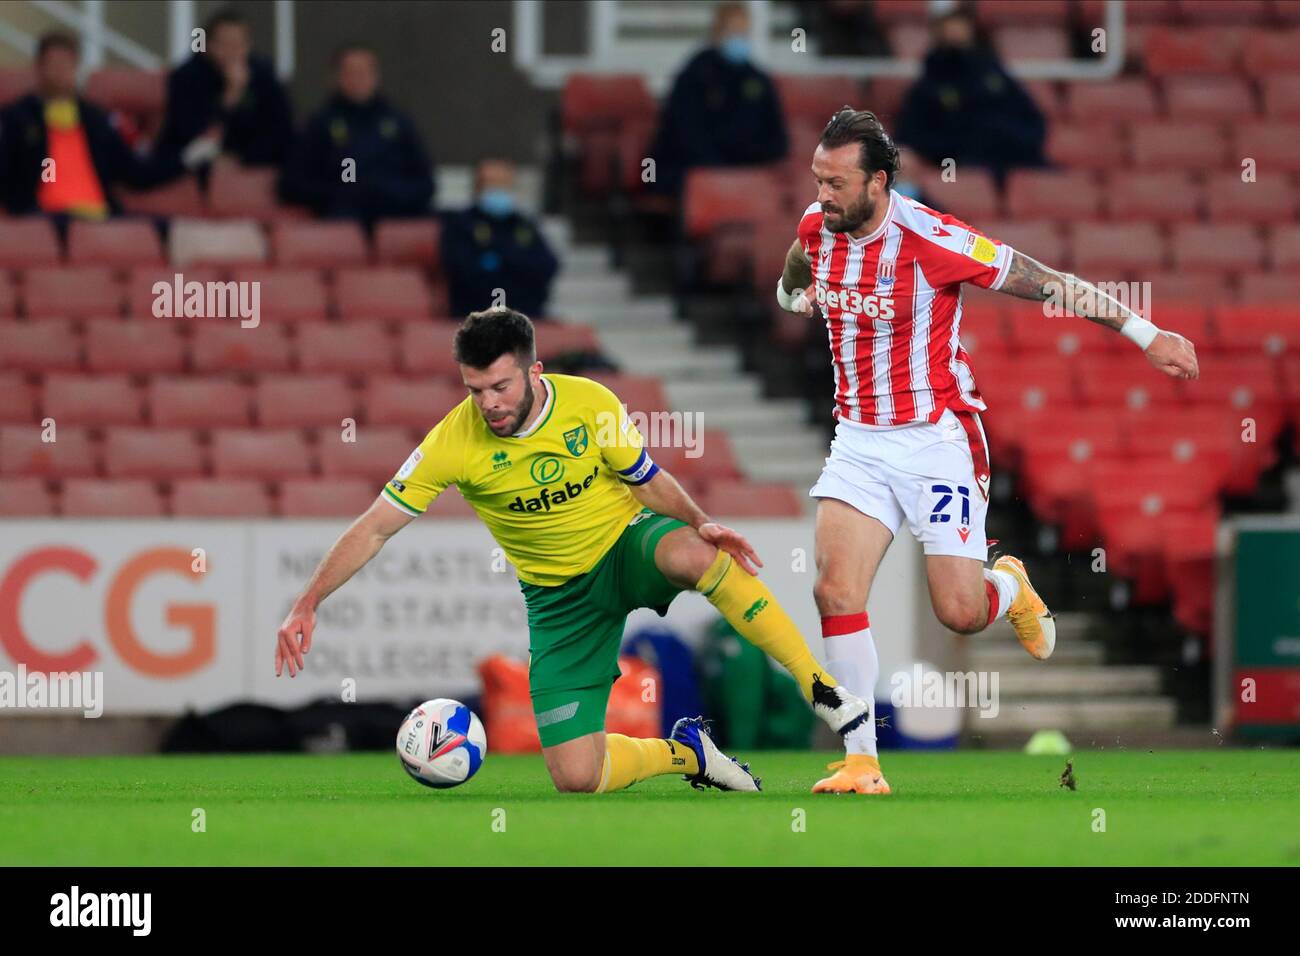 Steven Fletcher #21 of Stoke City and Grant Hanley #5 of Norwich City challenge for the ball Stock Photo